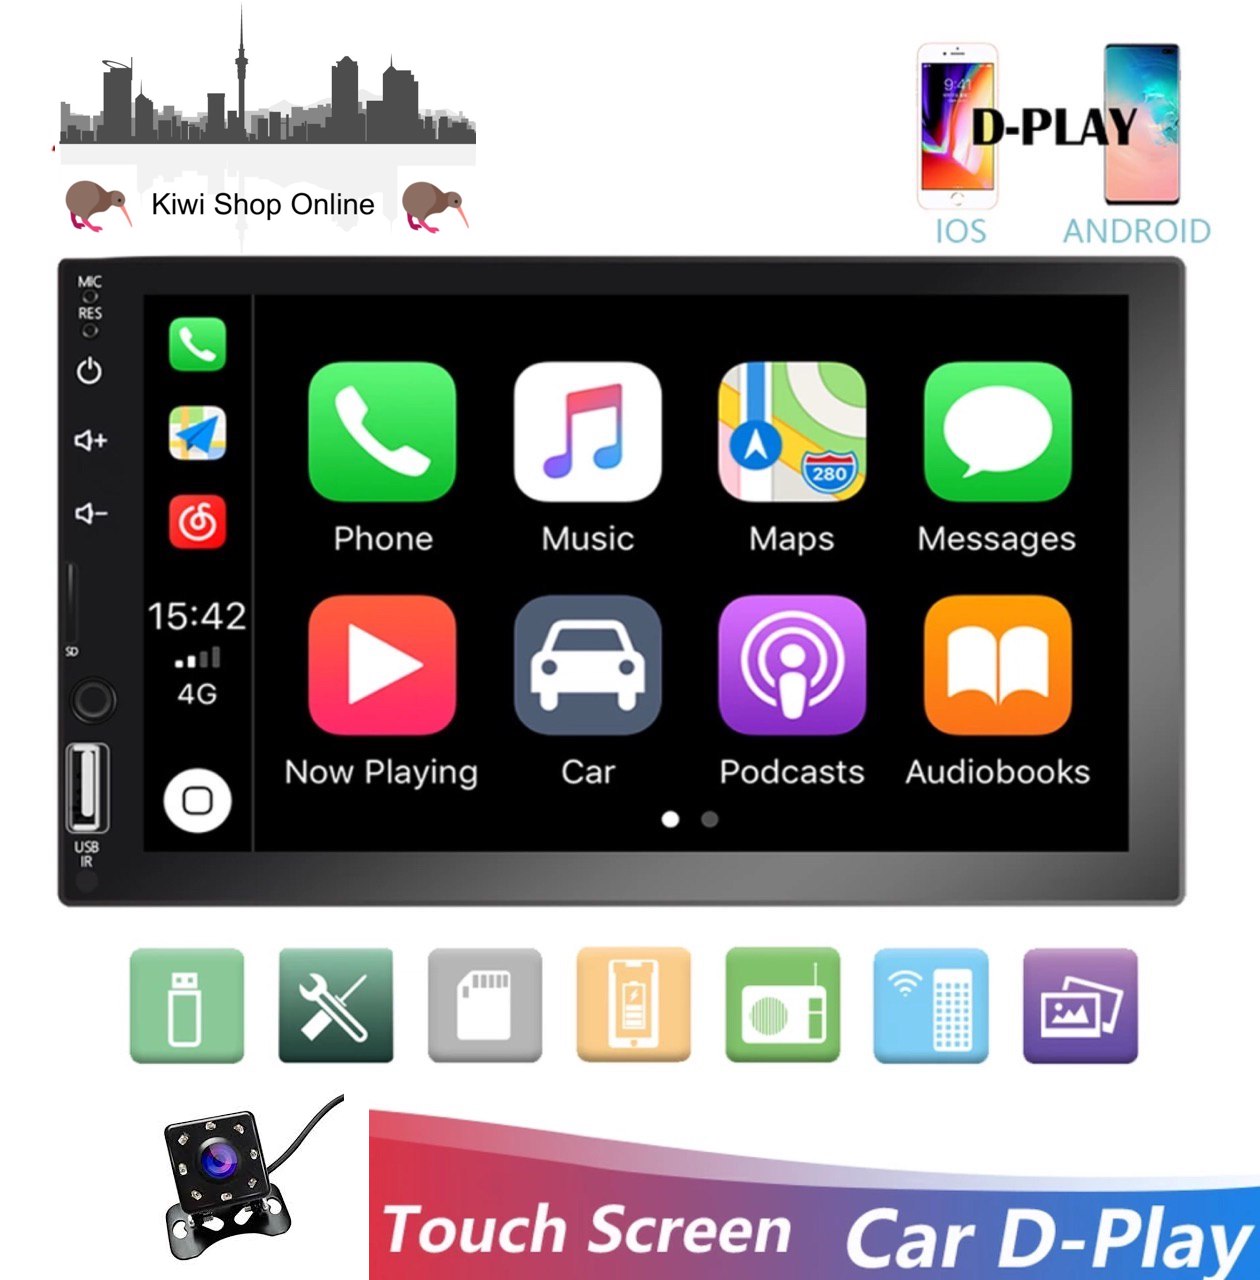 Car Stereo Double DIN Head Unit with Rear View Camera, Bluetooth, 7" Touch Screen Car Stereo Radio D-Play Mirrorlink